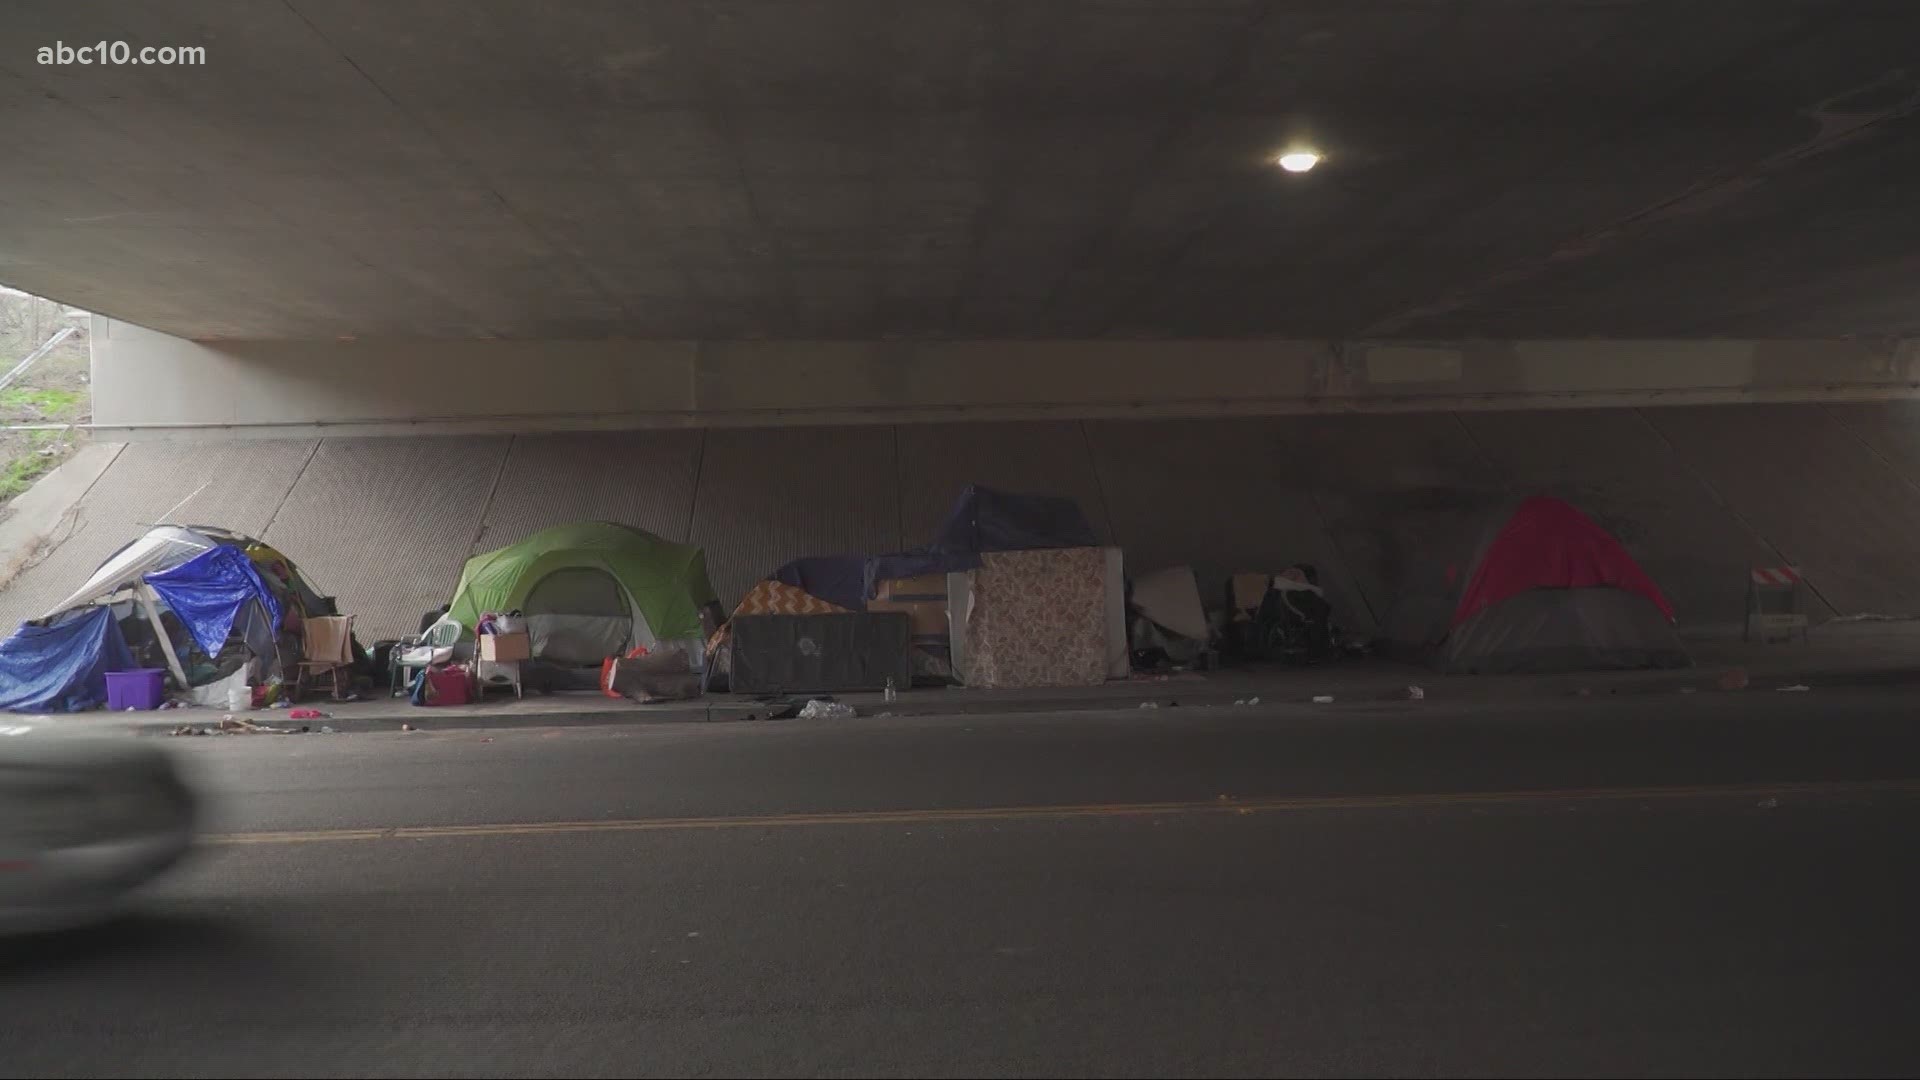 Advocates say that Sacramento leaders need to use what's available with open city properties to welcome homeless.